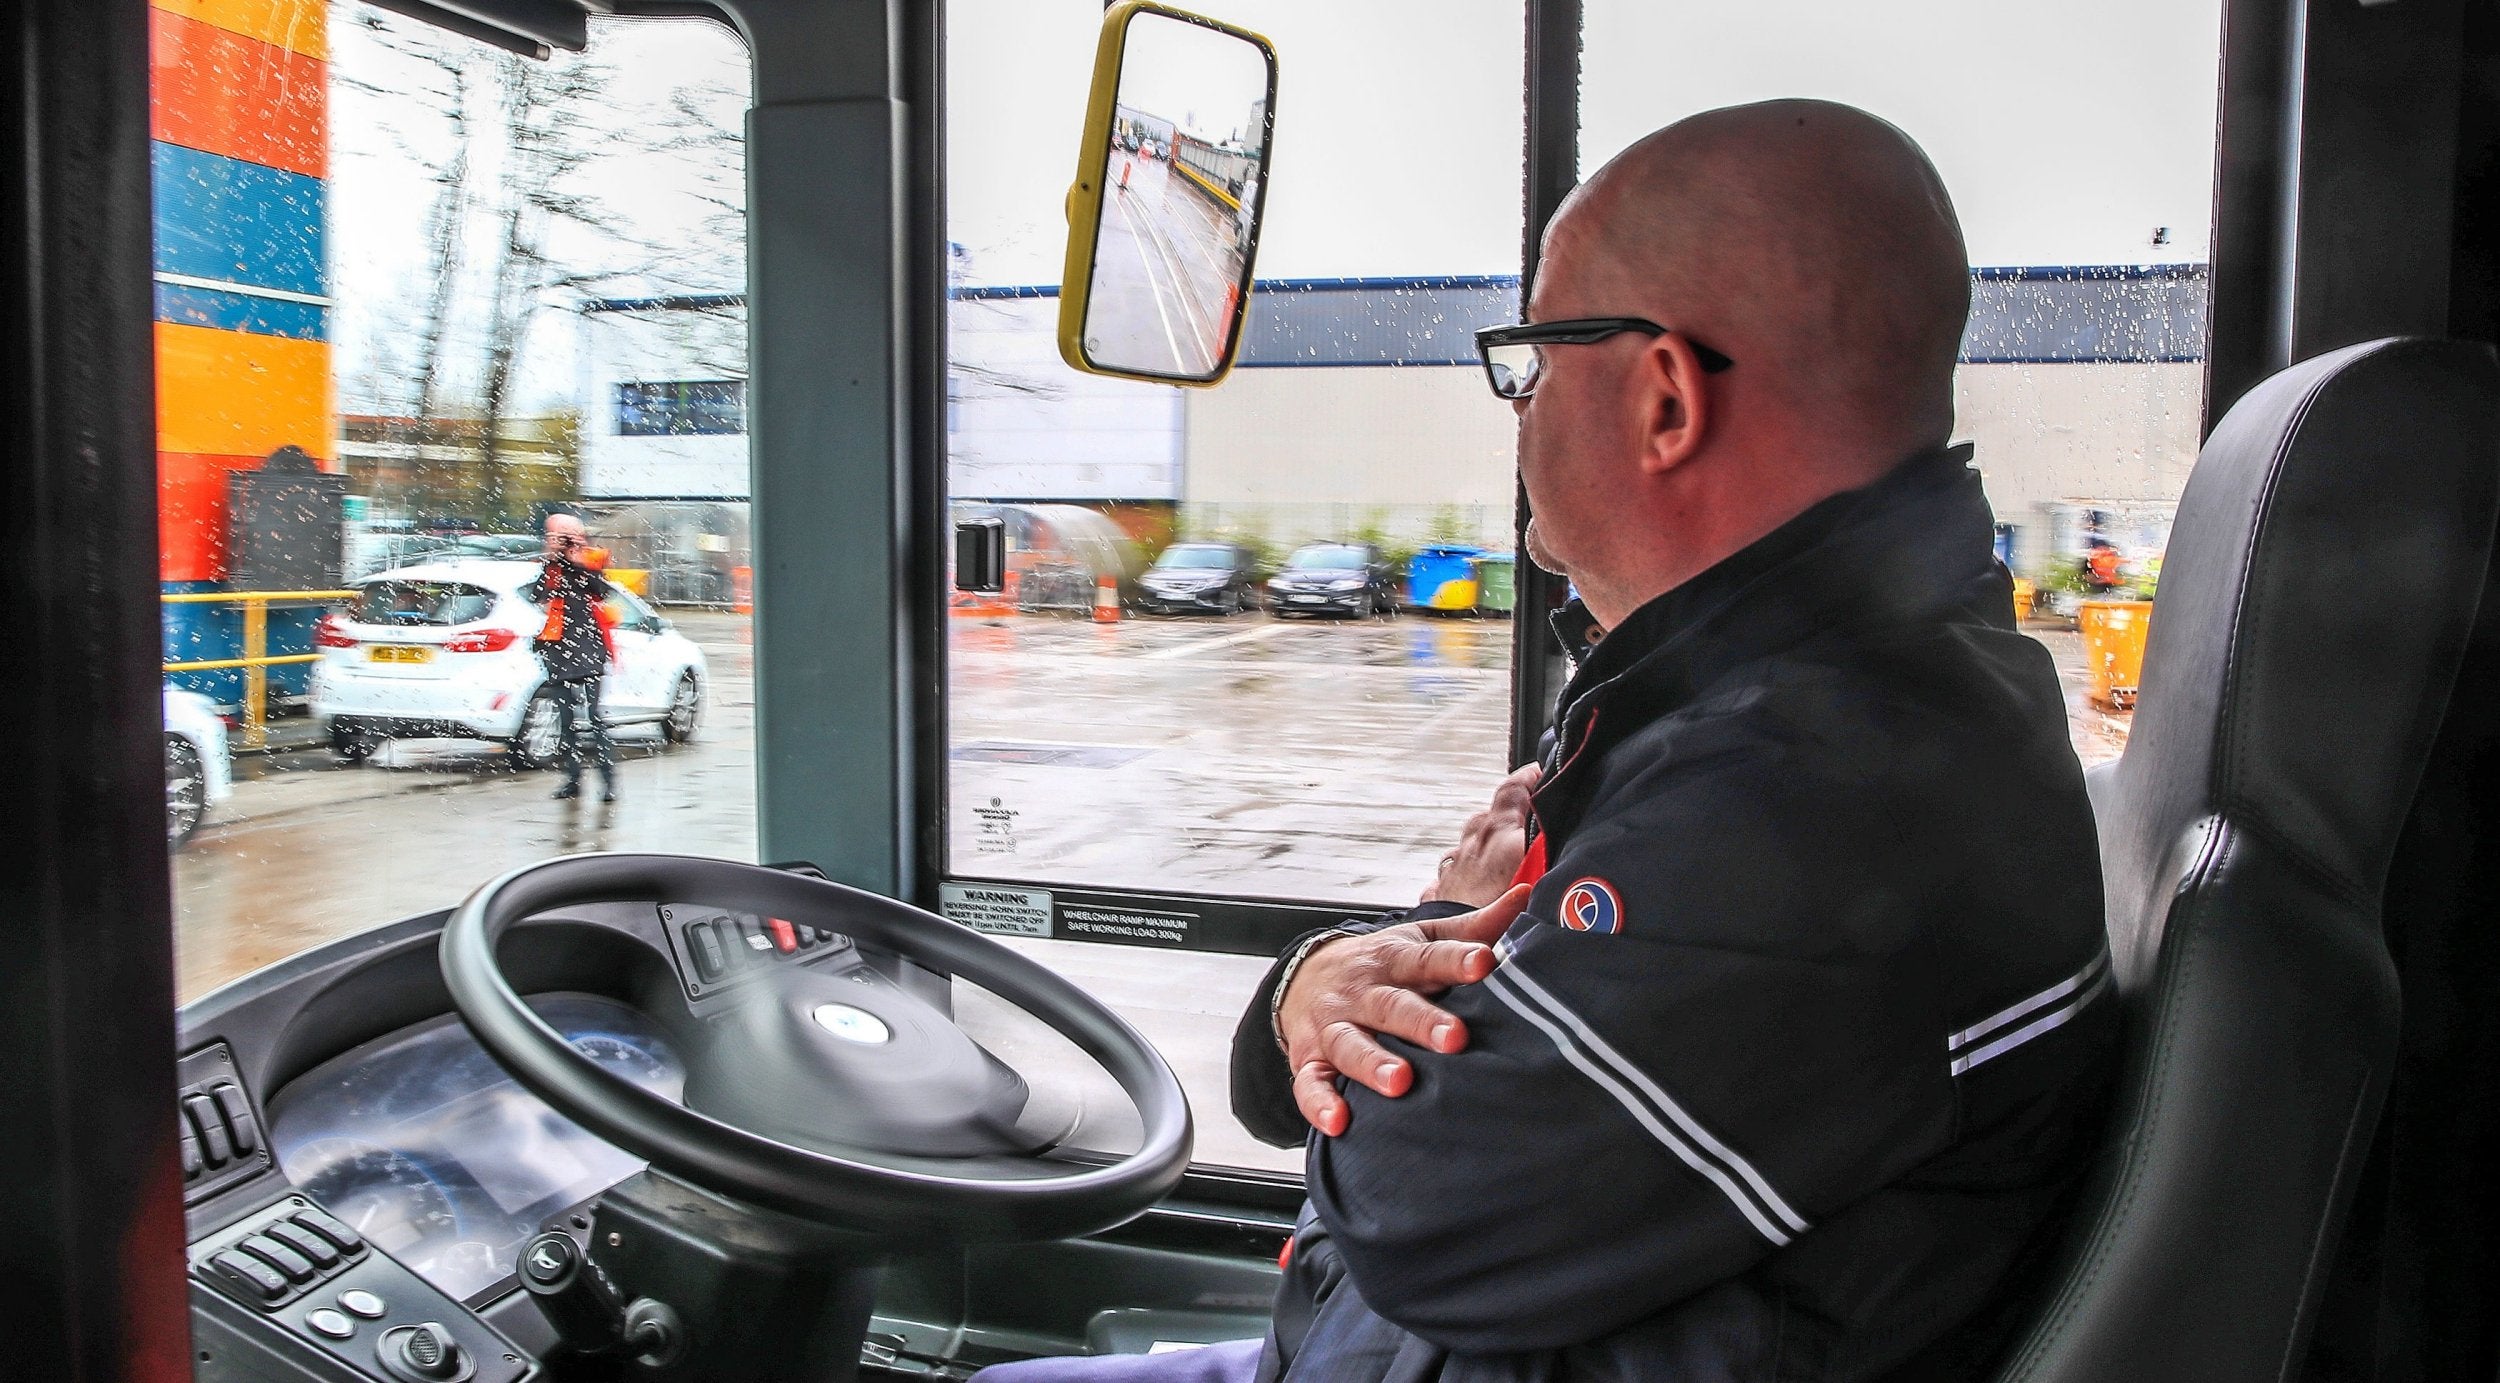 The driverless bus uses multiple sensors to move